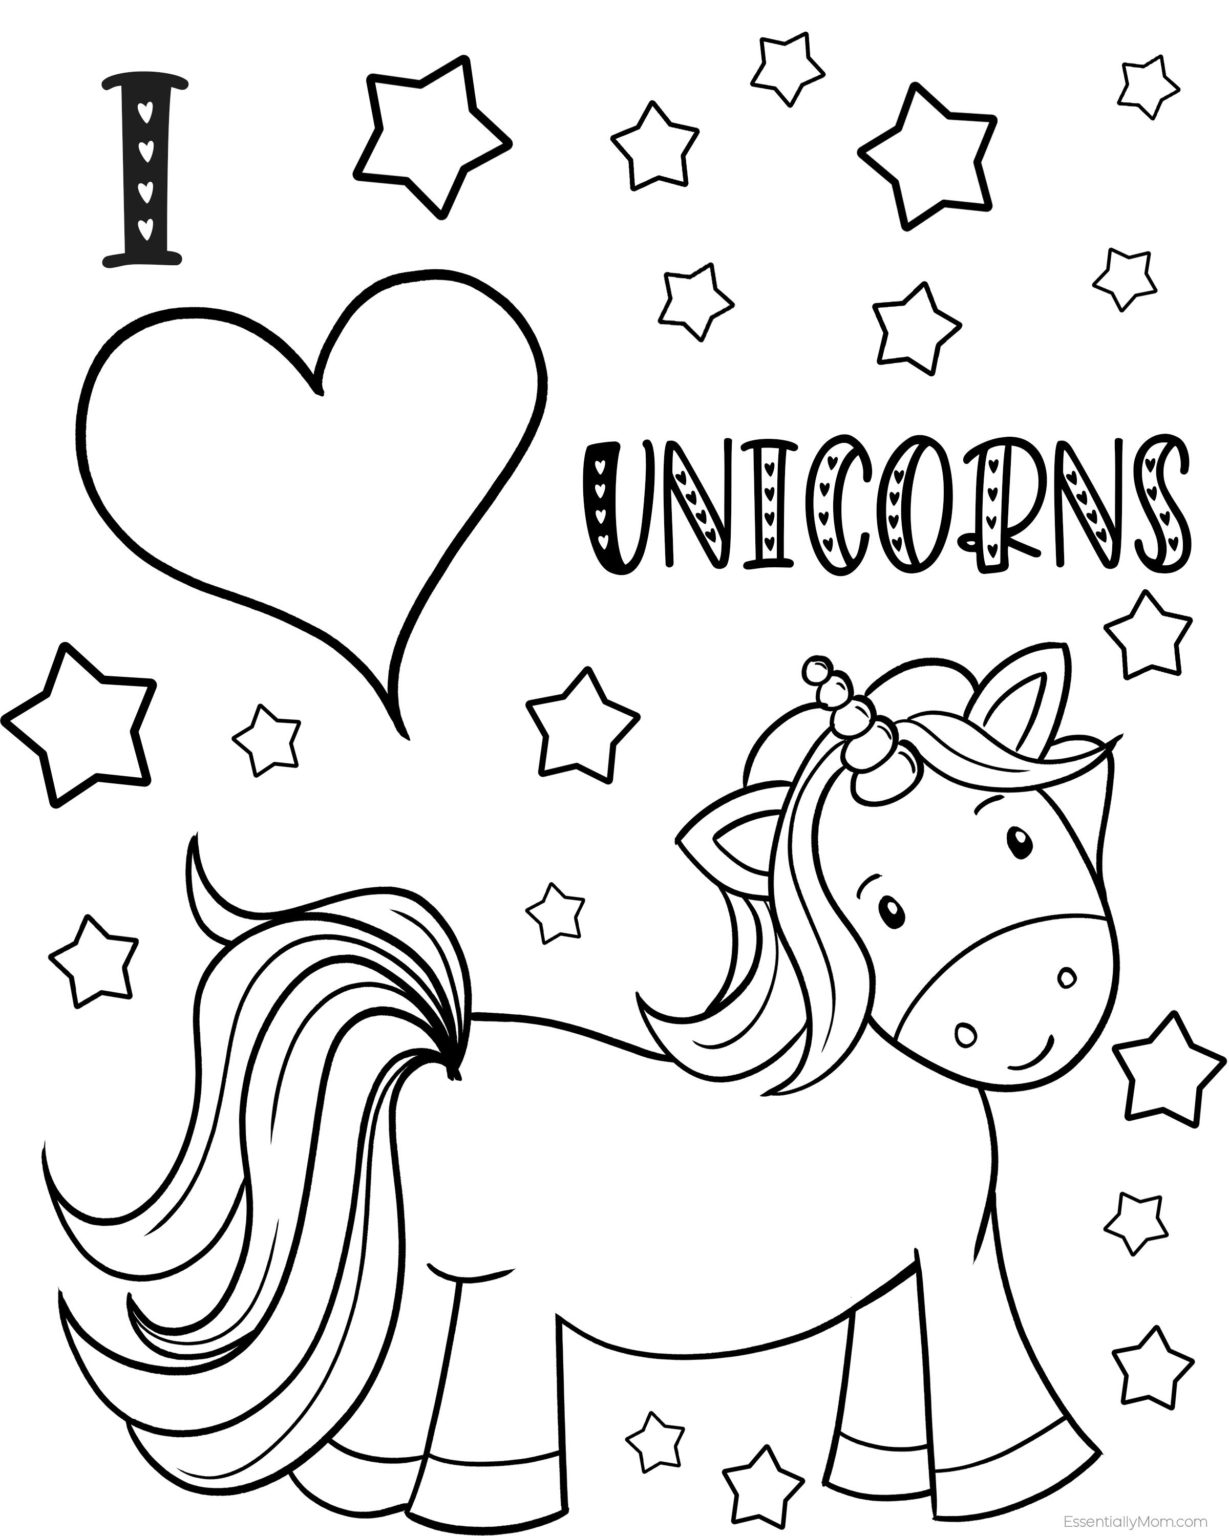 unicorn printable coloring pages for kids